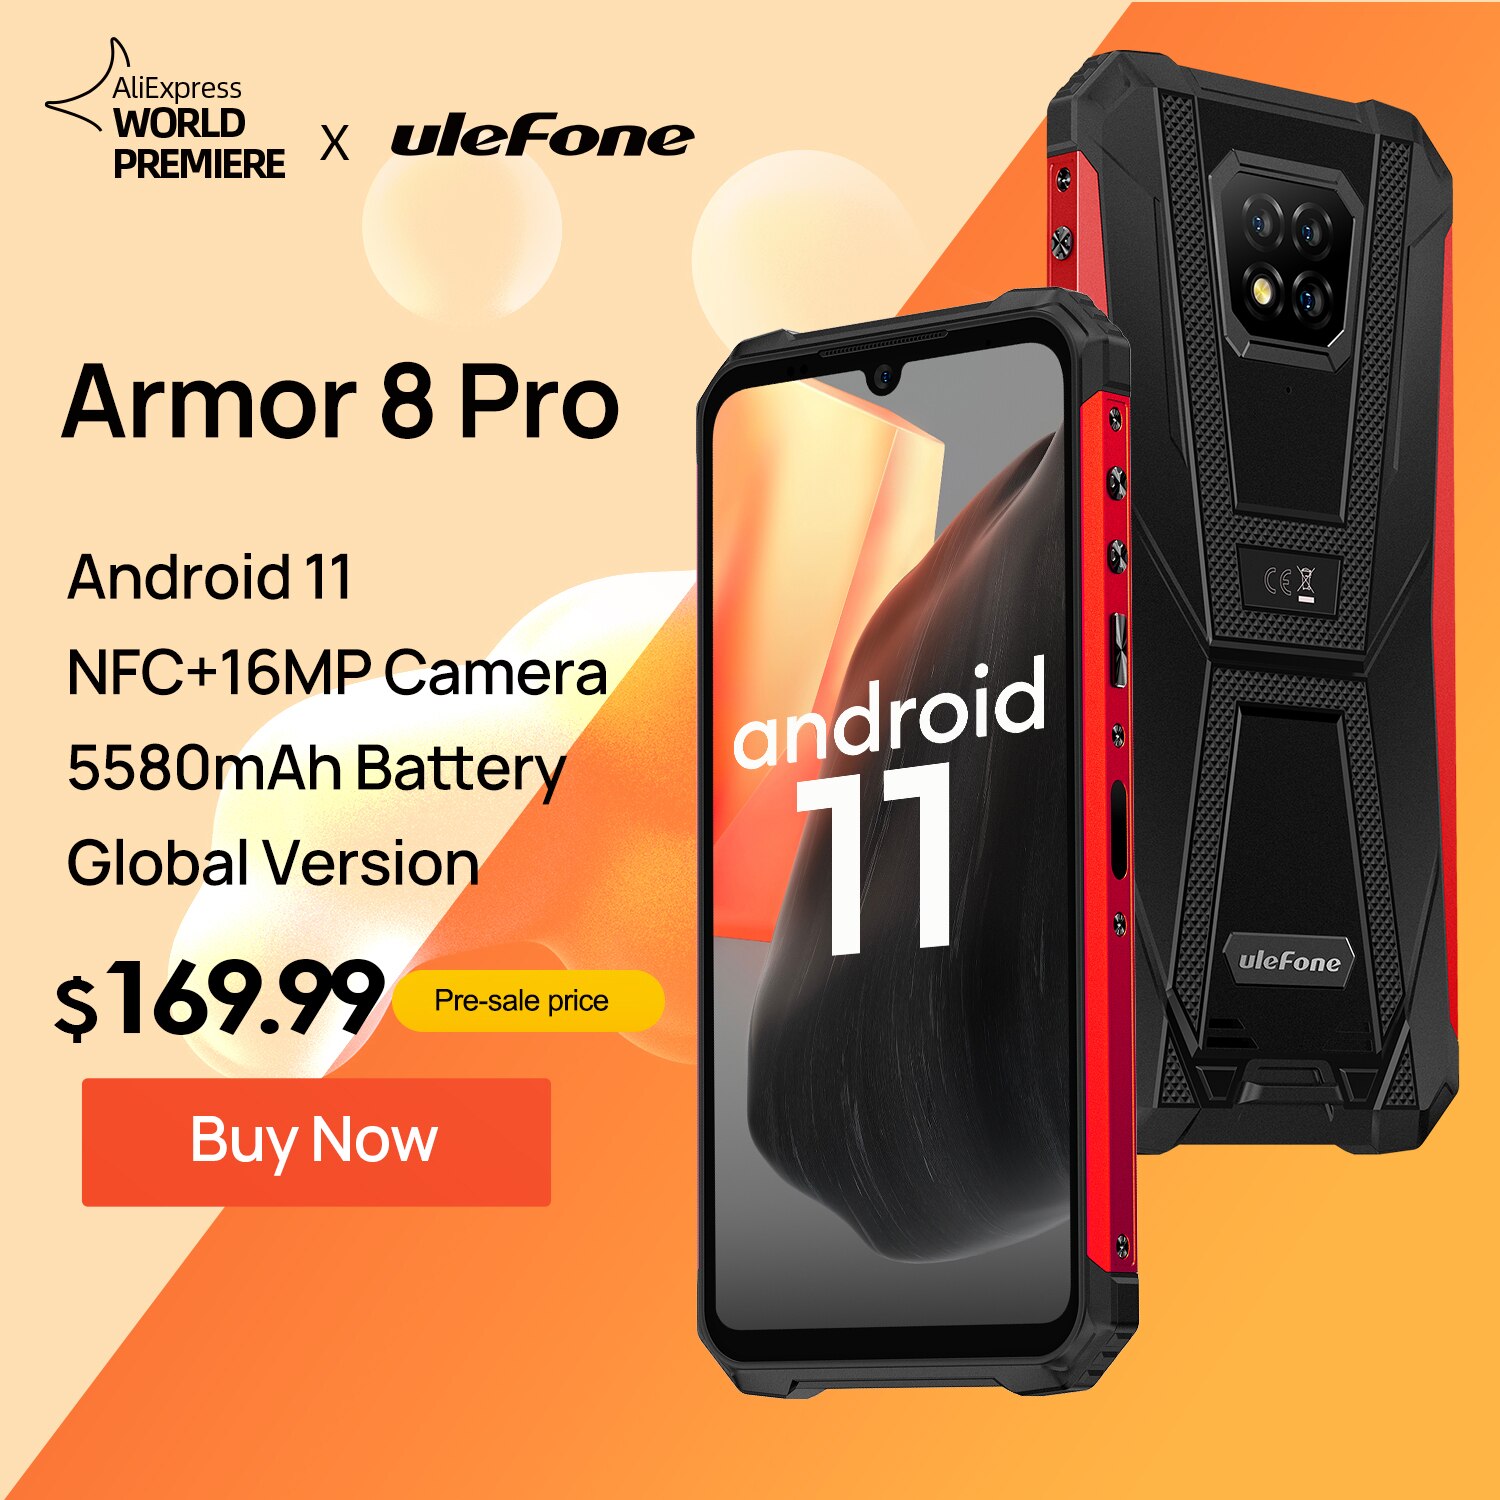 hoes
WORLD

0
revere X  UleFone

Armor 8 Pro

Android 11
NFC+16MP Camera
5580mAh Battery
Global Version

$169.99, rower

a